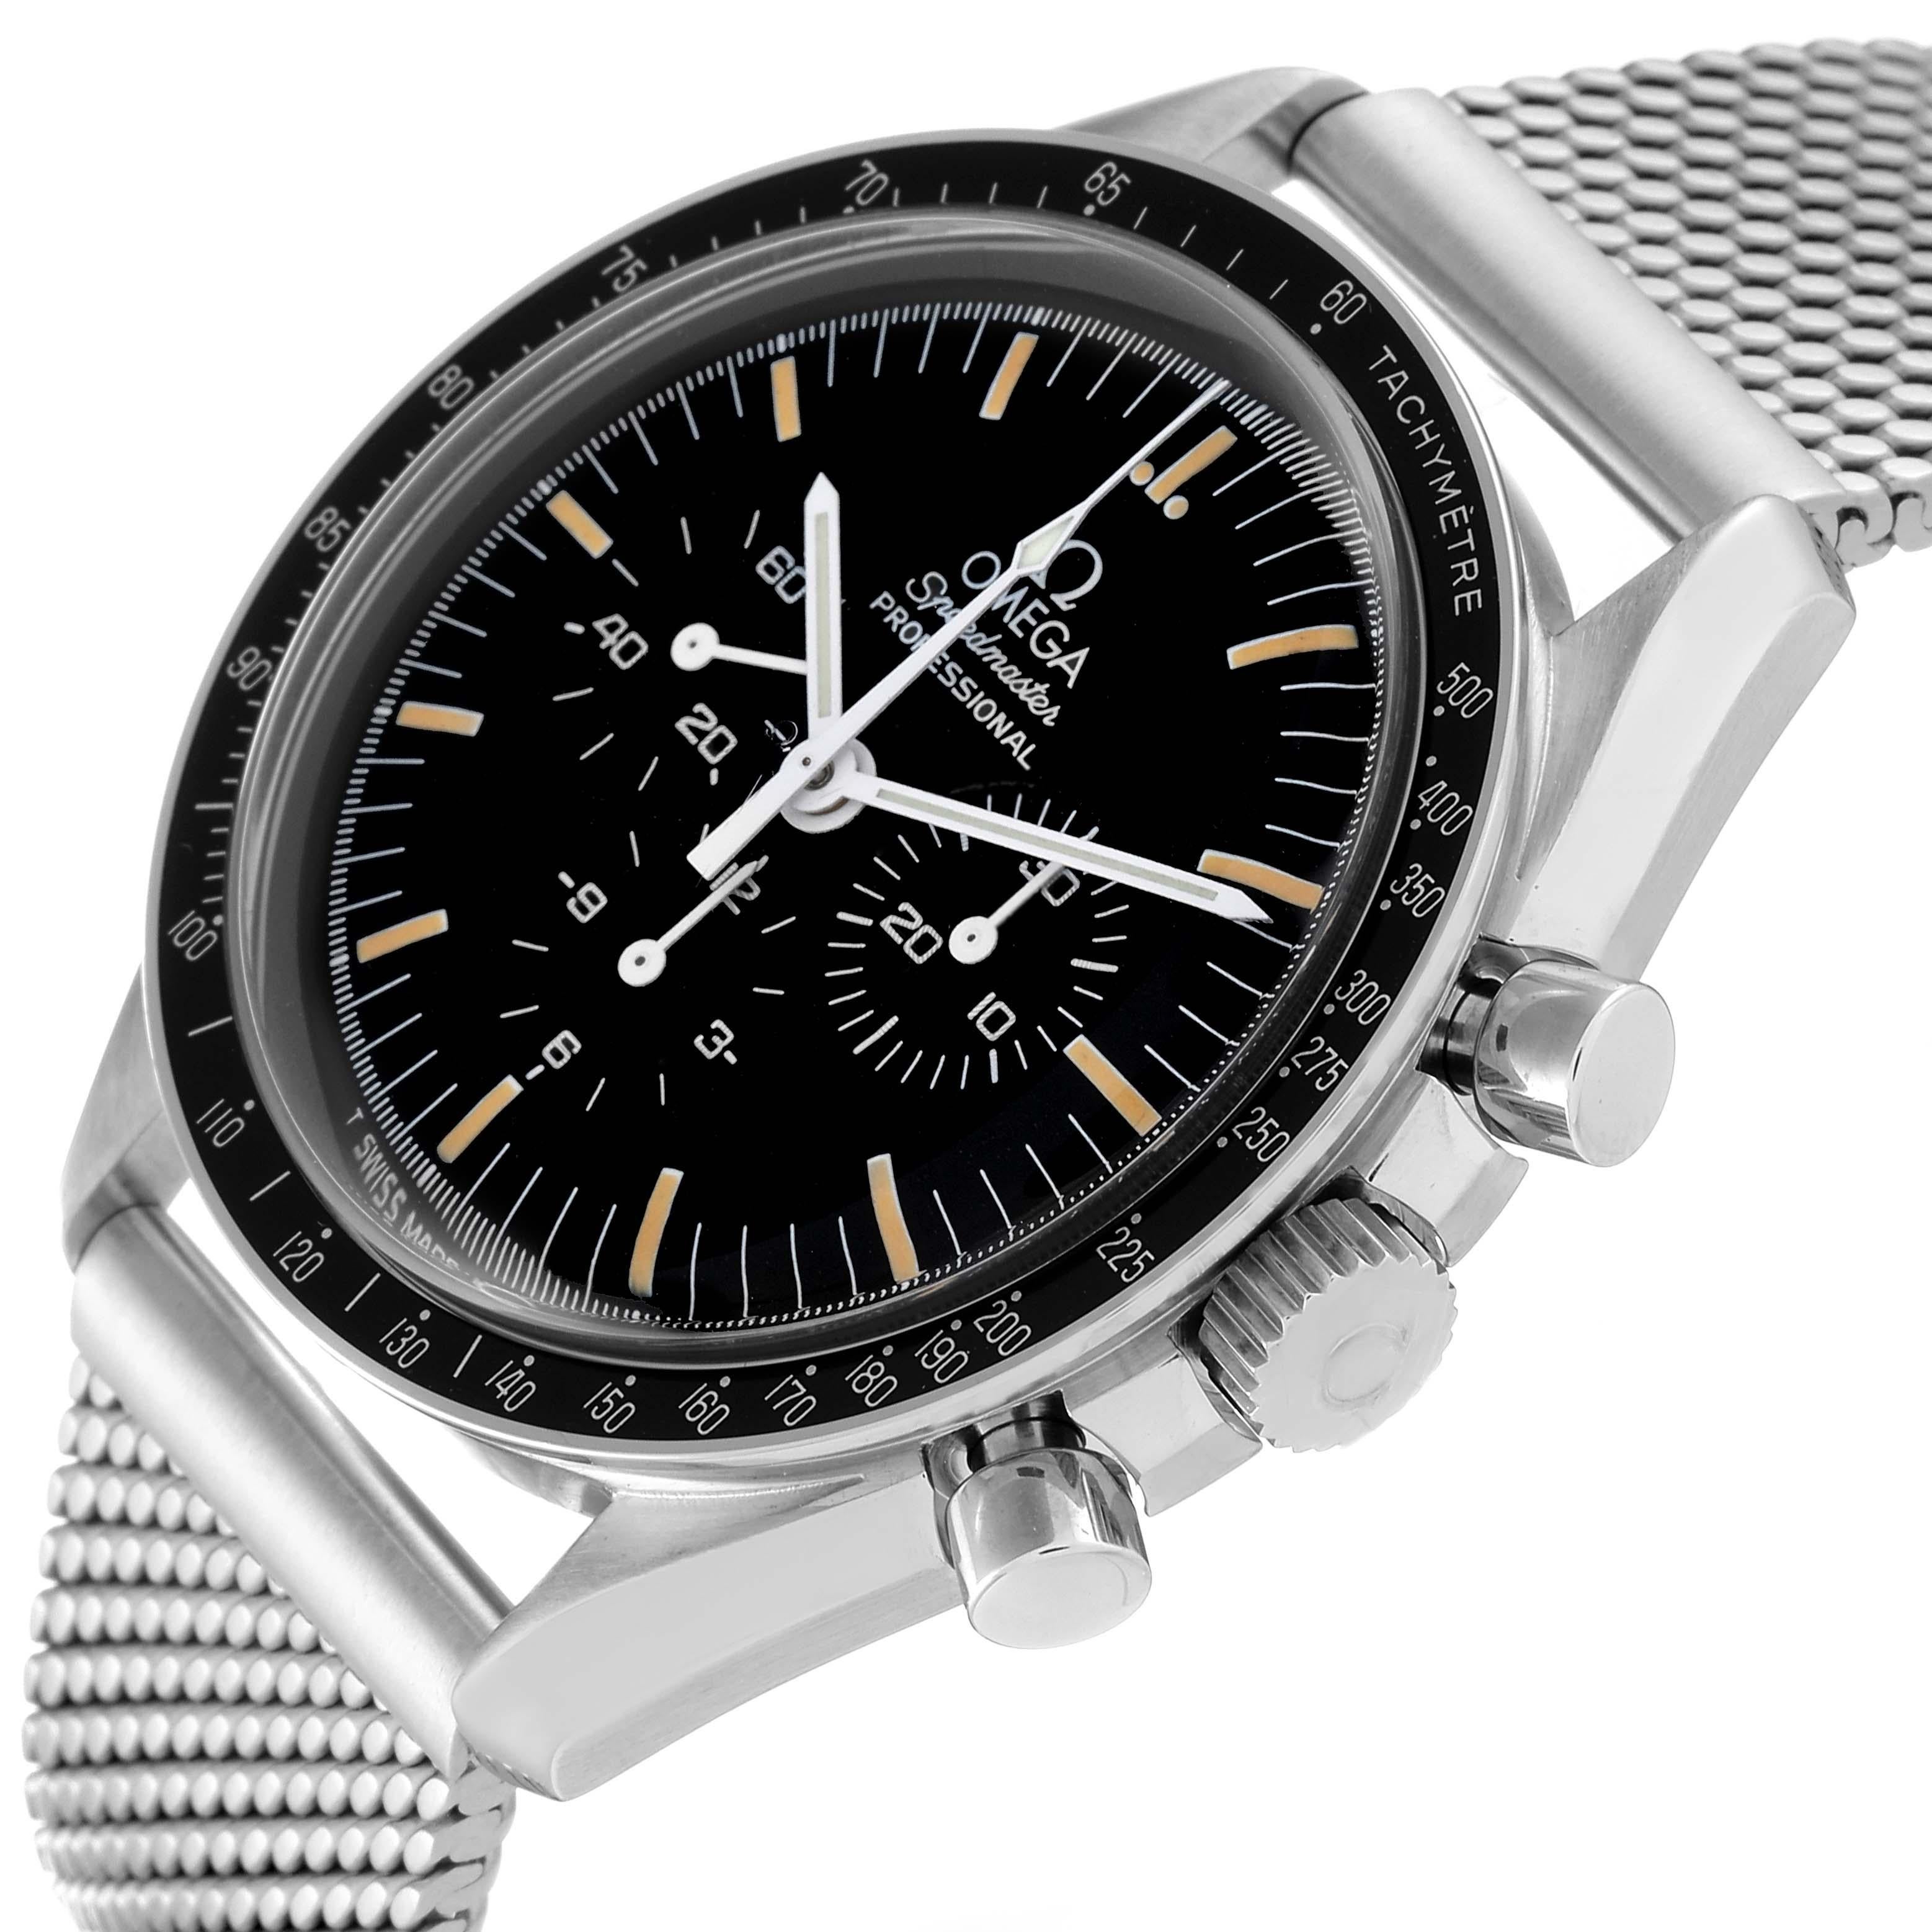 Omega Speedmaster MoonWatch Chronograph Black Dial Steel Mens Watch 3570.50.00 For Sale 1